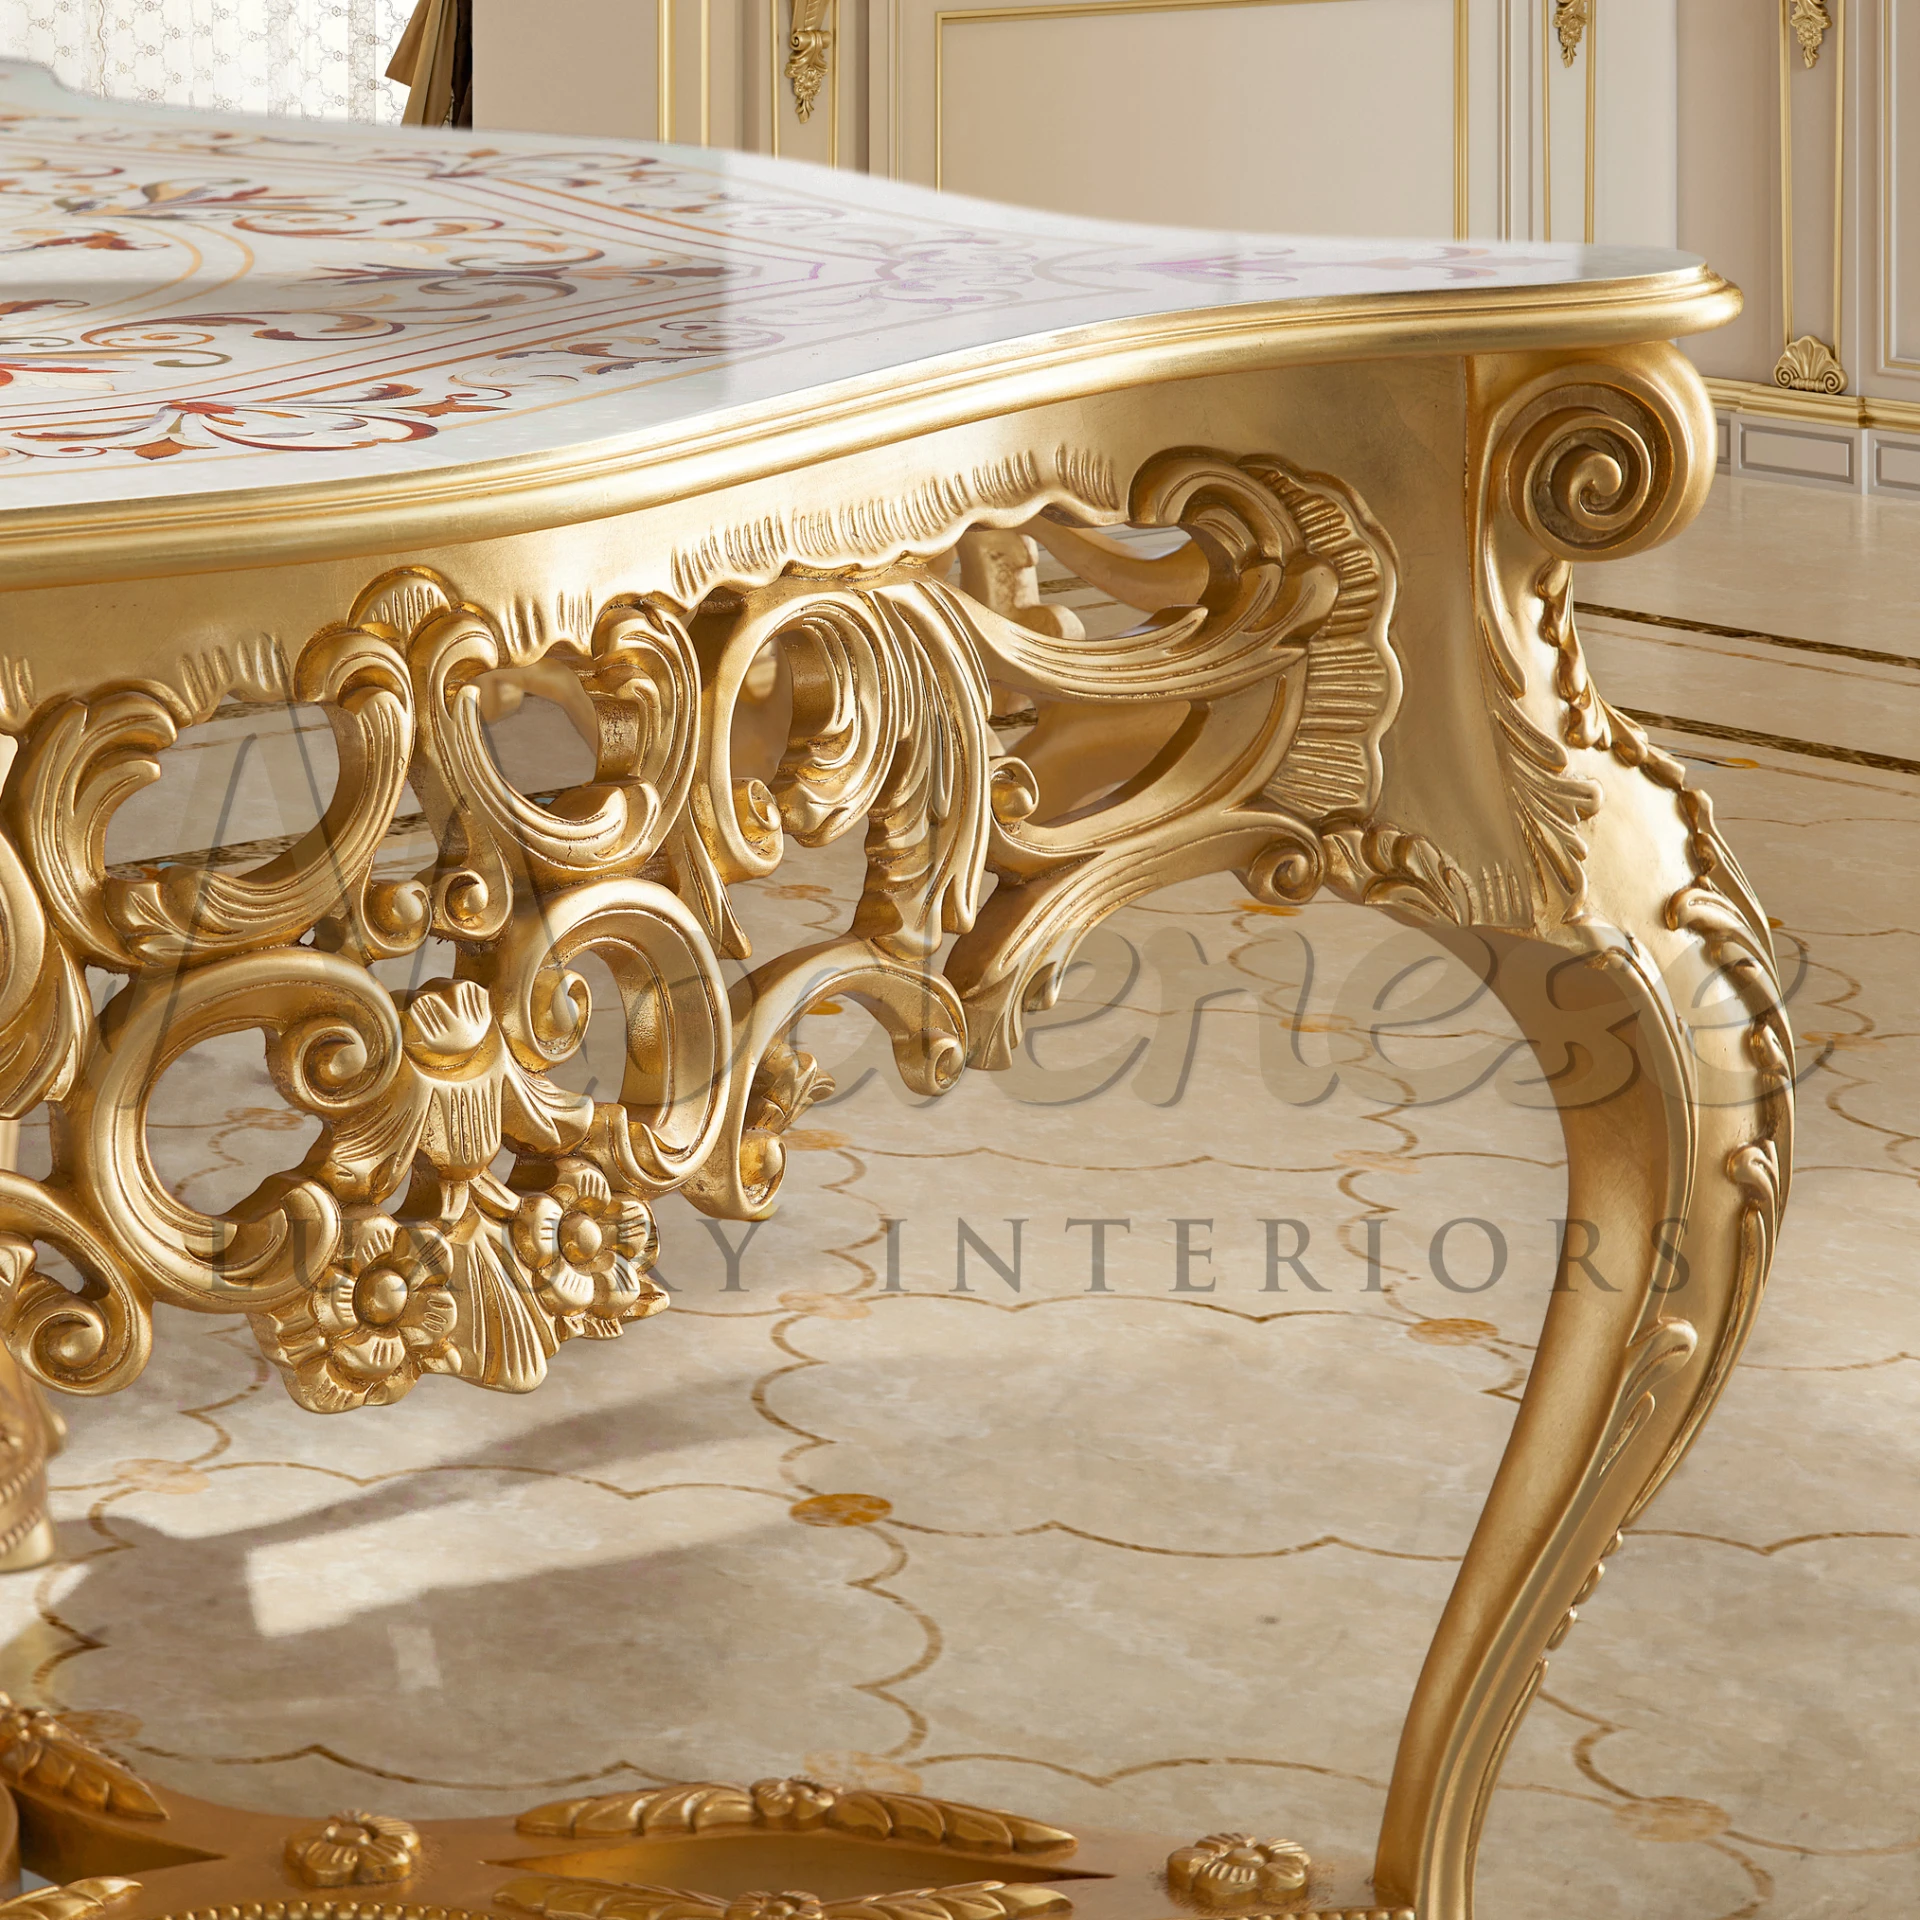 Luxury Classic Style Central Table, a testament to classic interior design with its exquisite gold leaf structure finishing.
